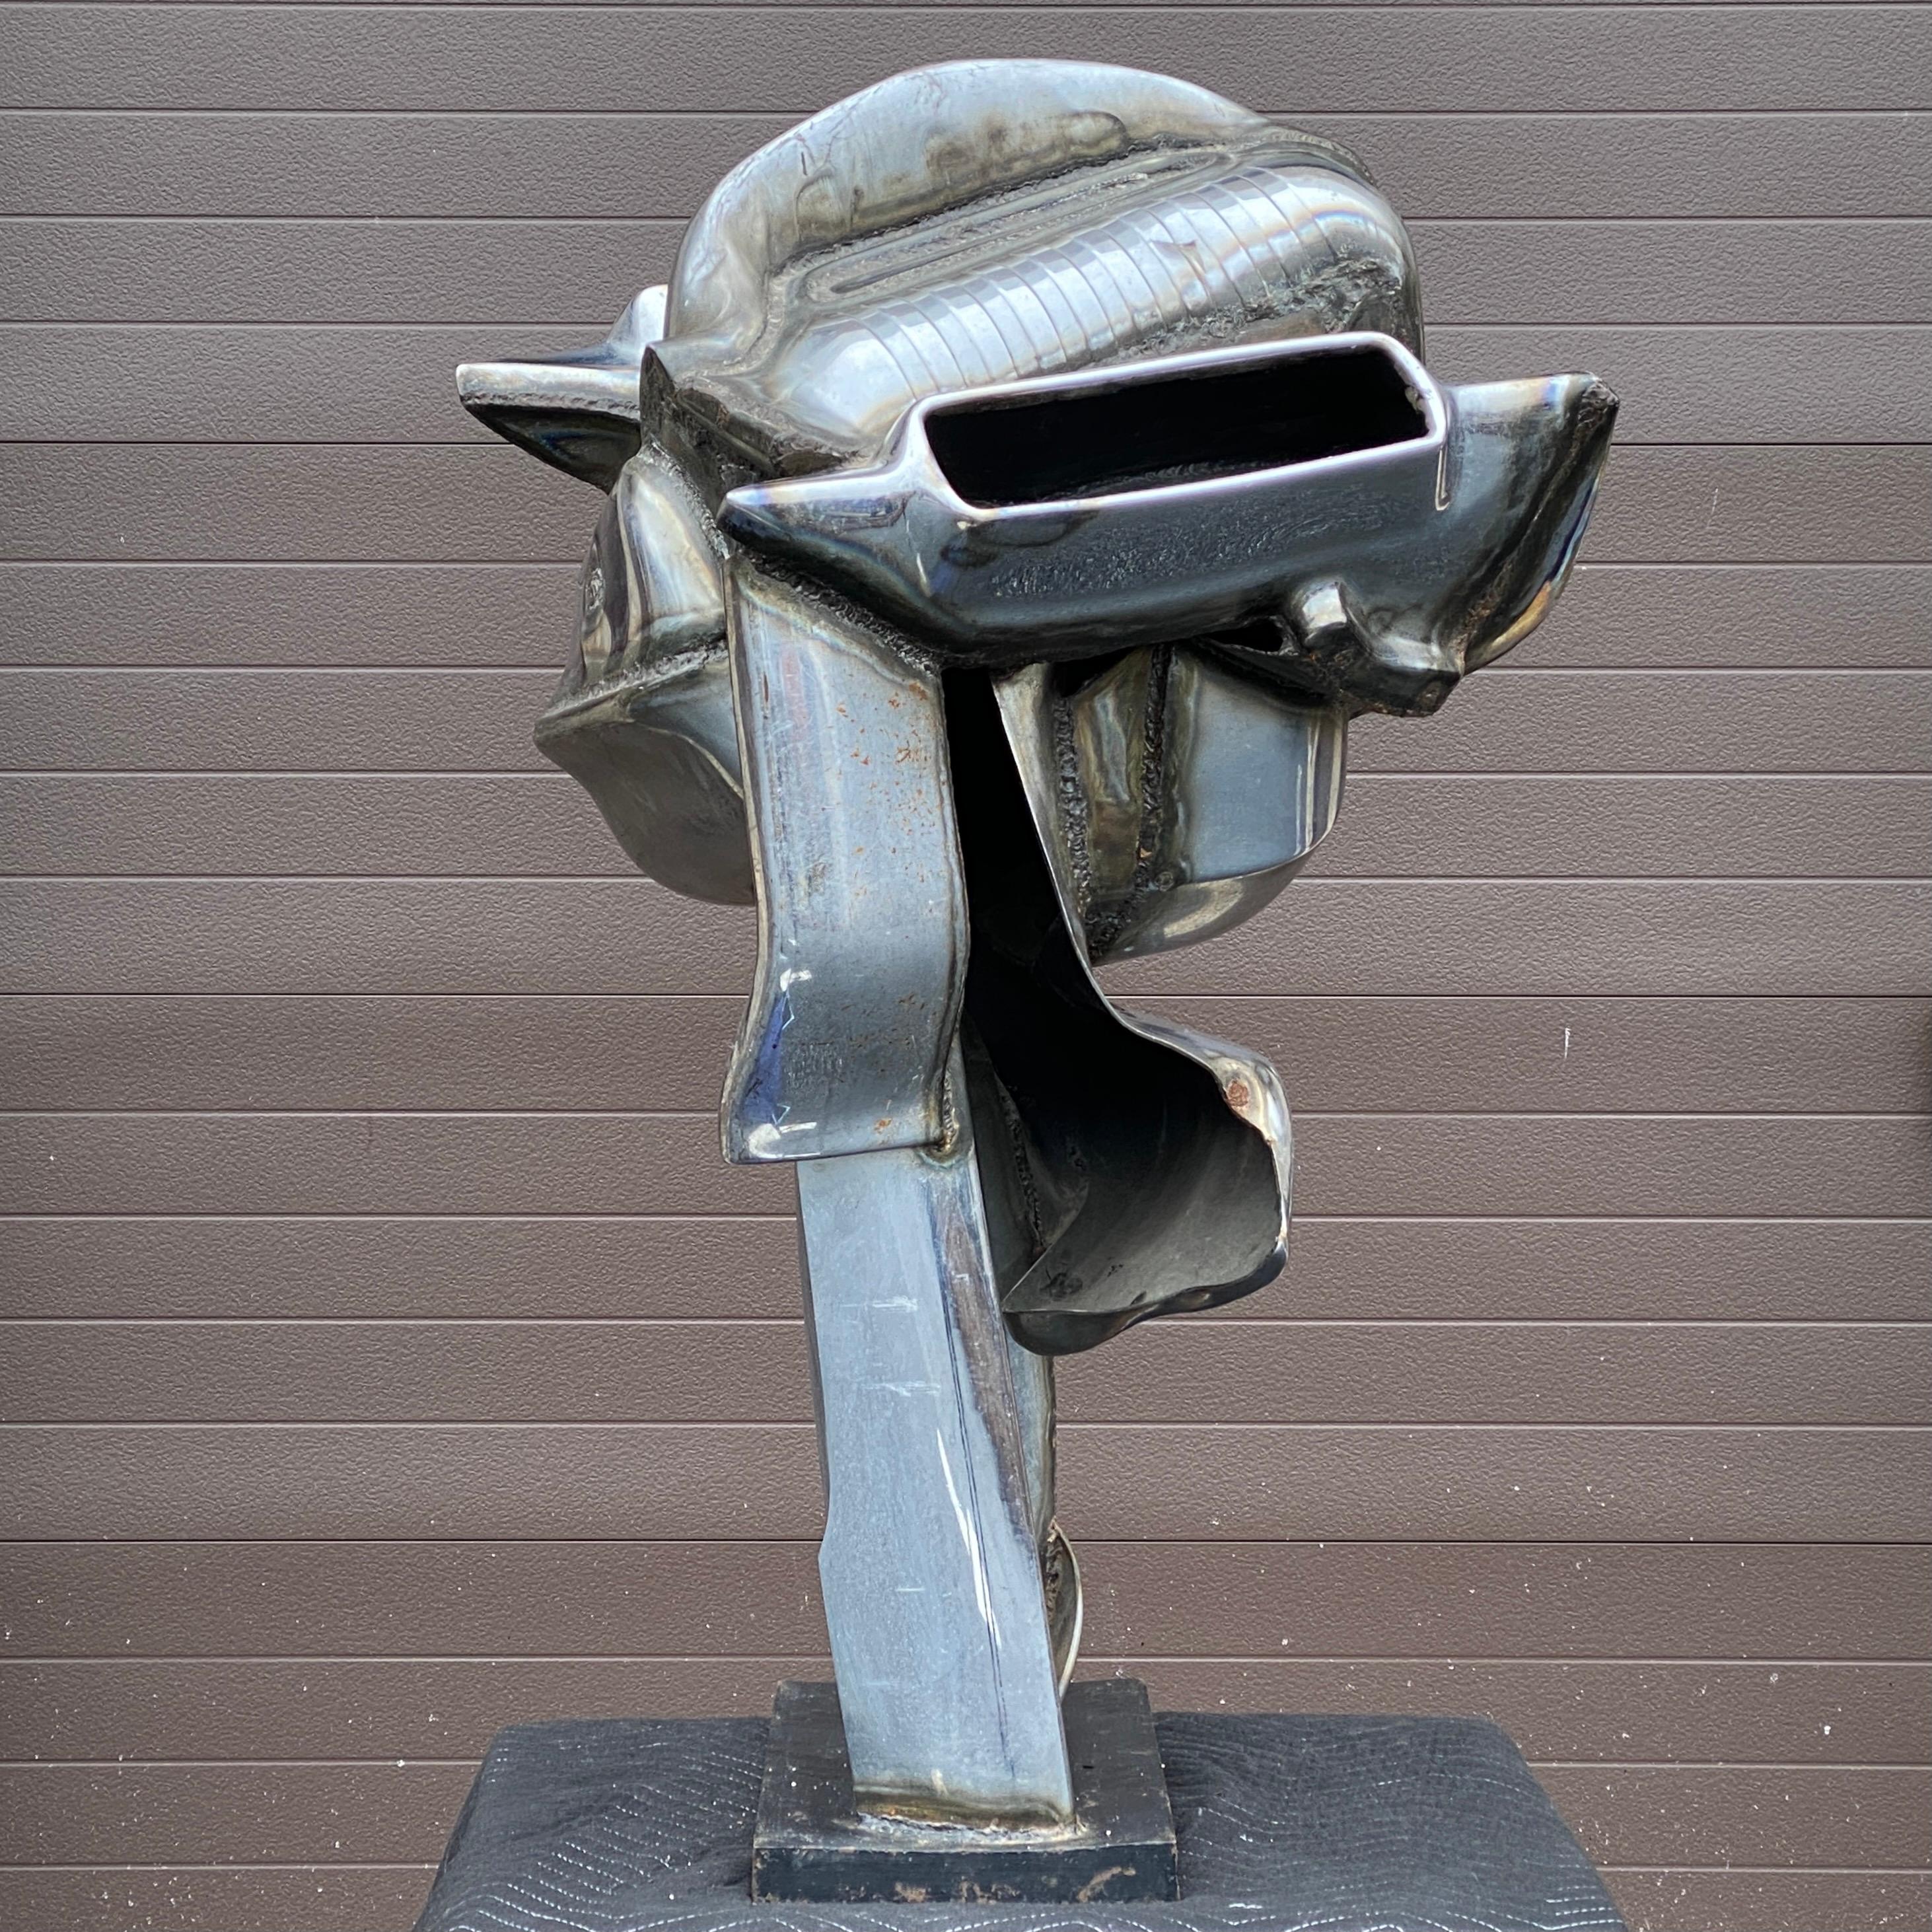 Large scale welded chromium-plated steel salvaged car parts sculpture by artist Jason Seley (1919-1983). Signed by the artist.
Rectangular base measures roughly 18